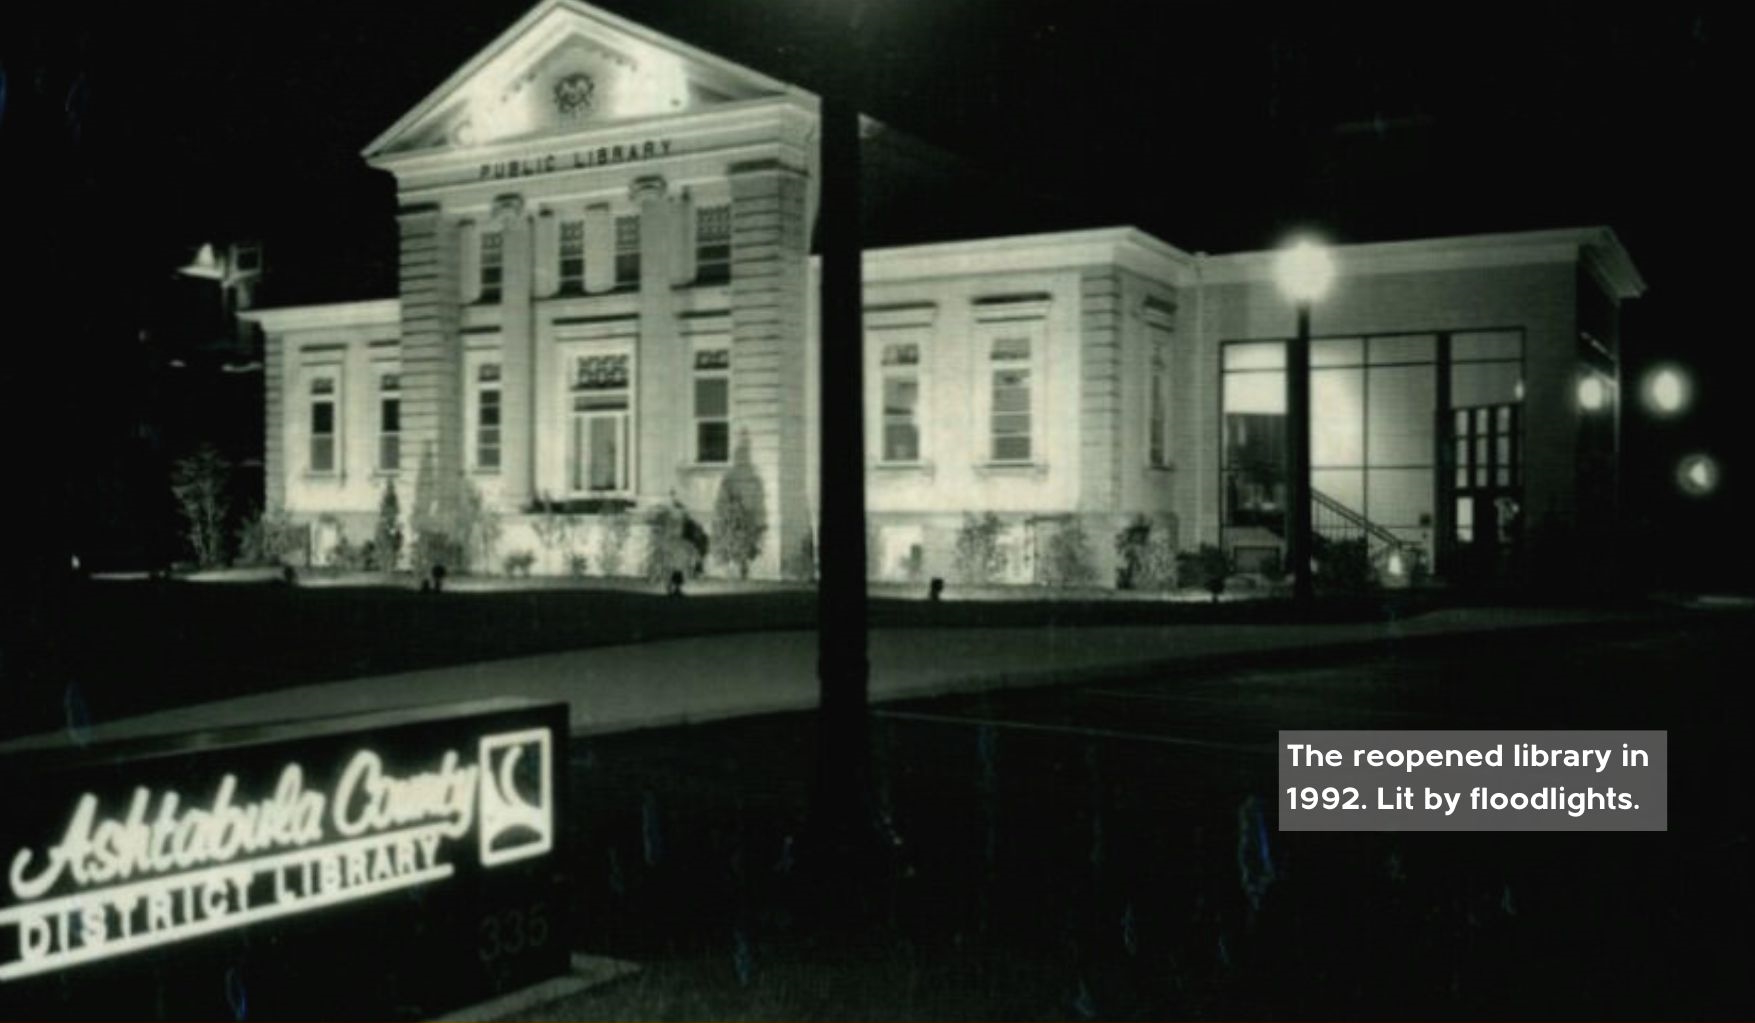 The reopened library in 1992. Lit by floodlights.